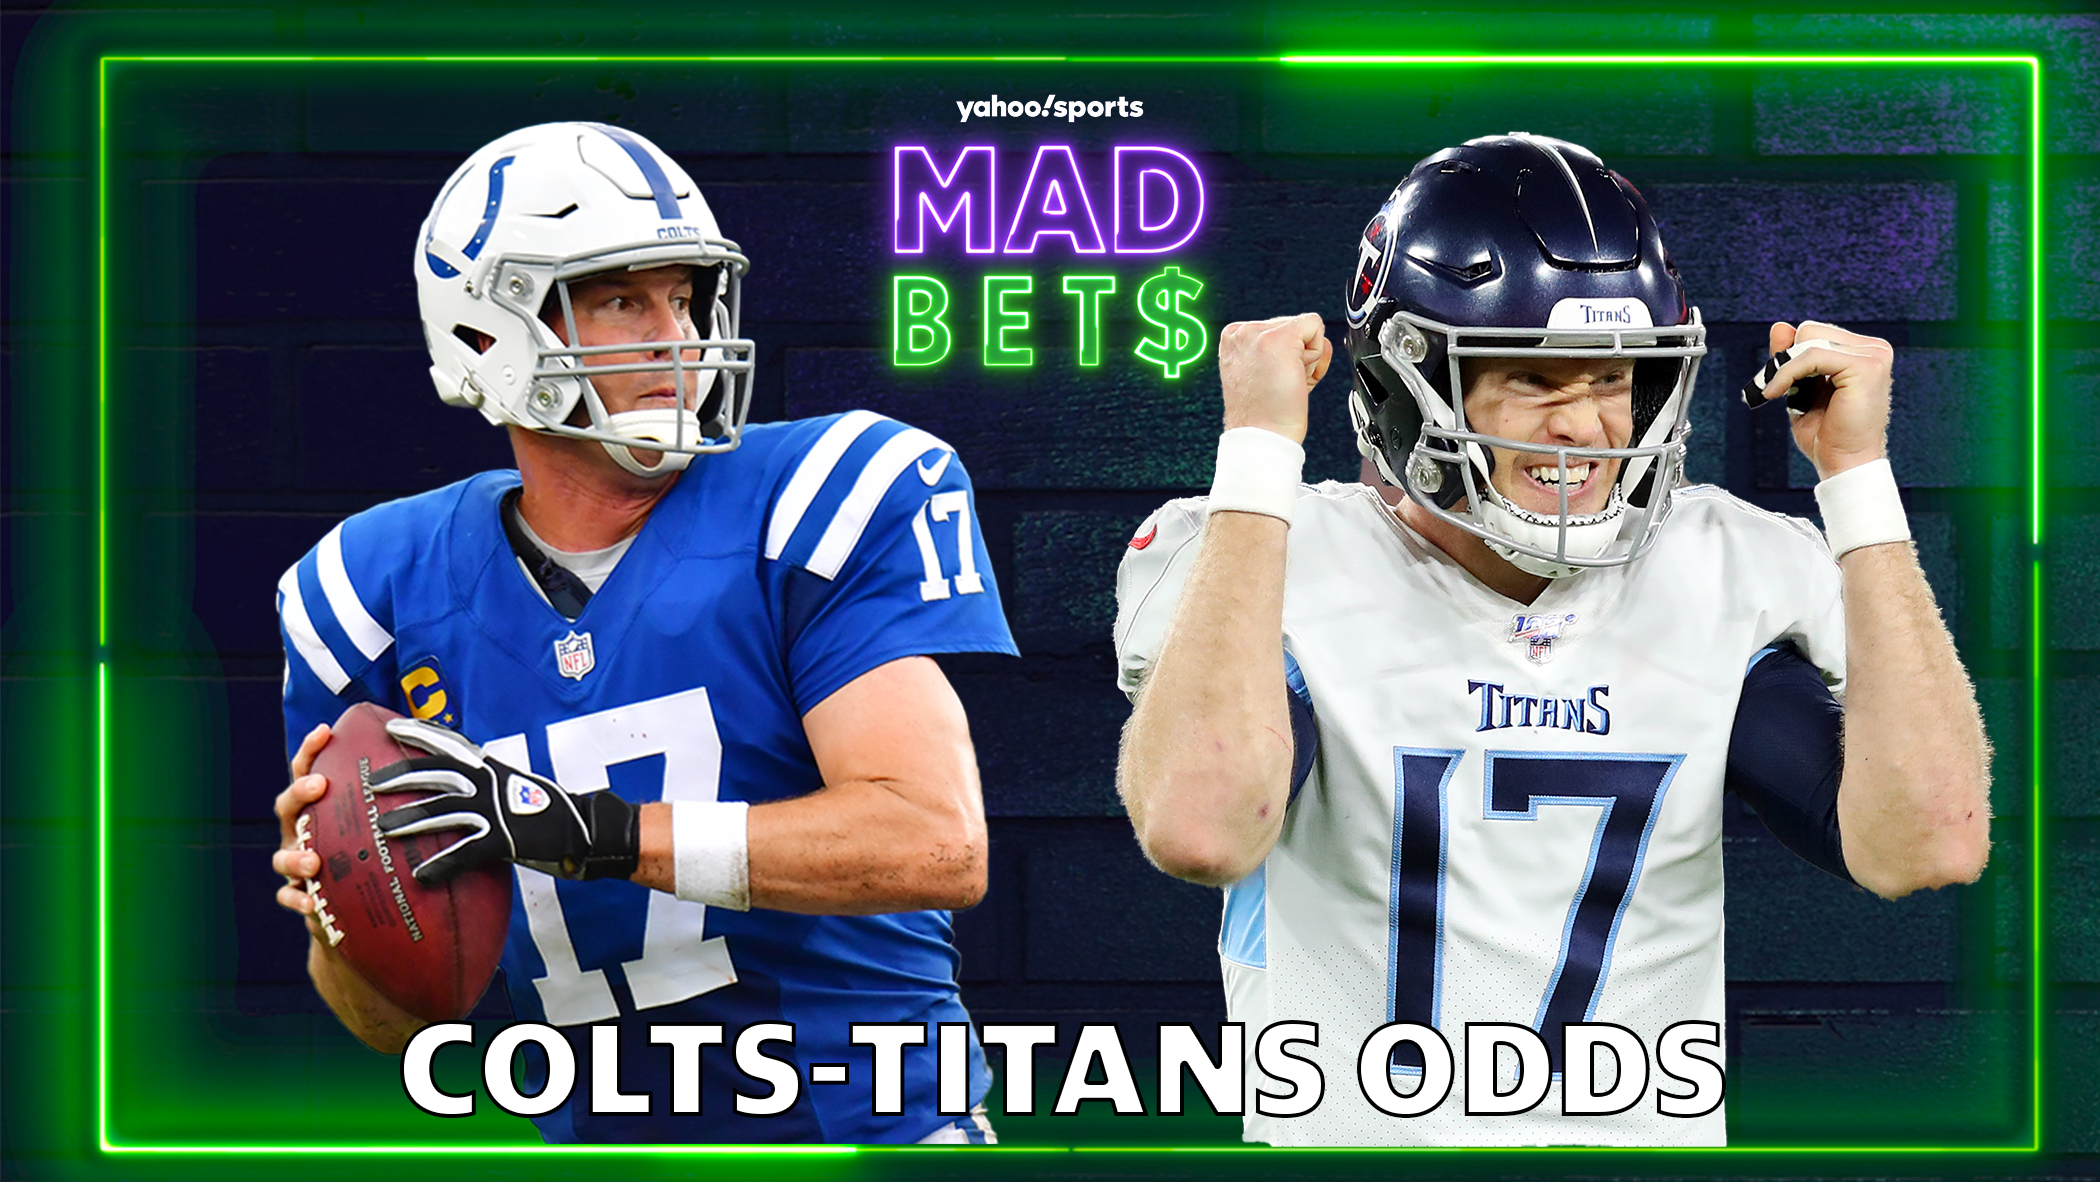 NFL Week 10 odds: An overwhelming percentage of bets on Colts vs. Titans  caused a big line move